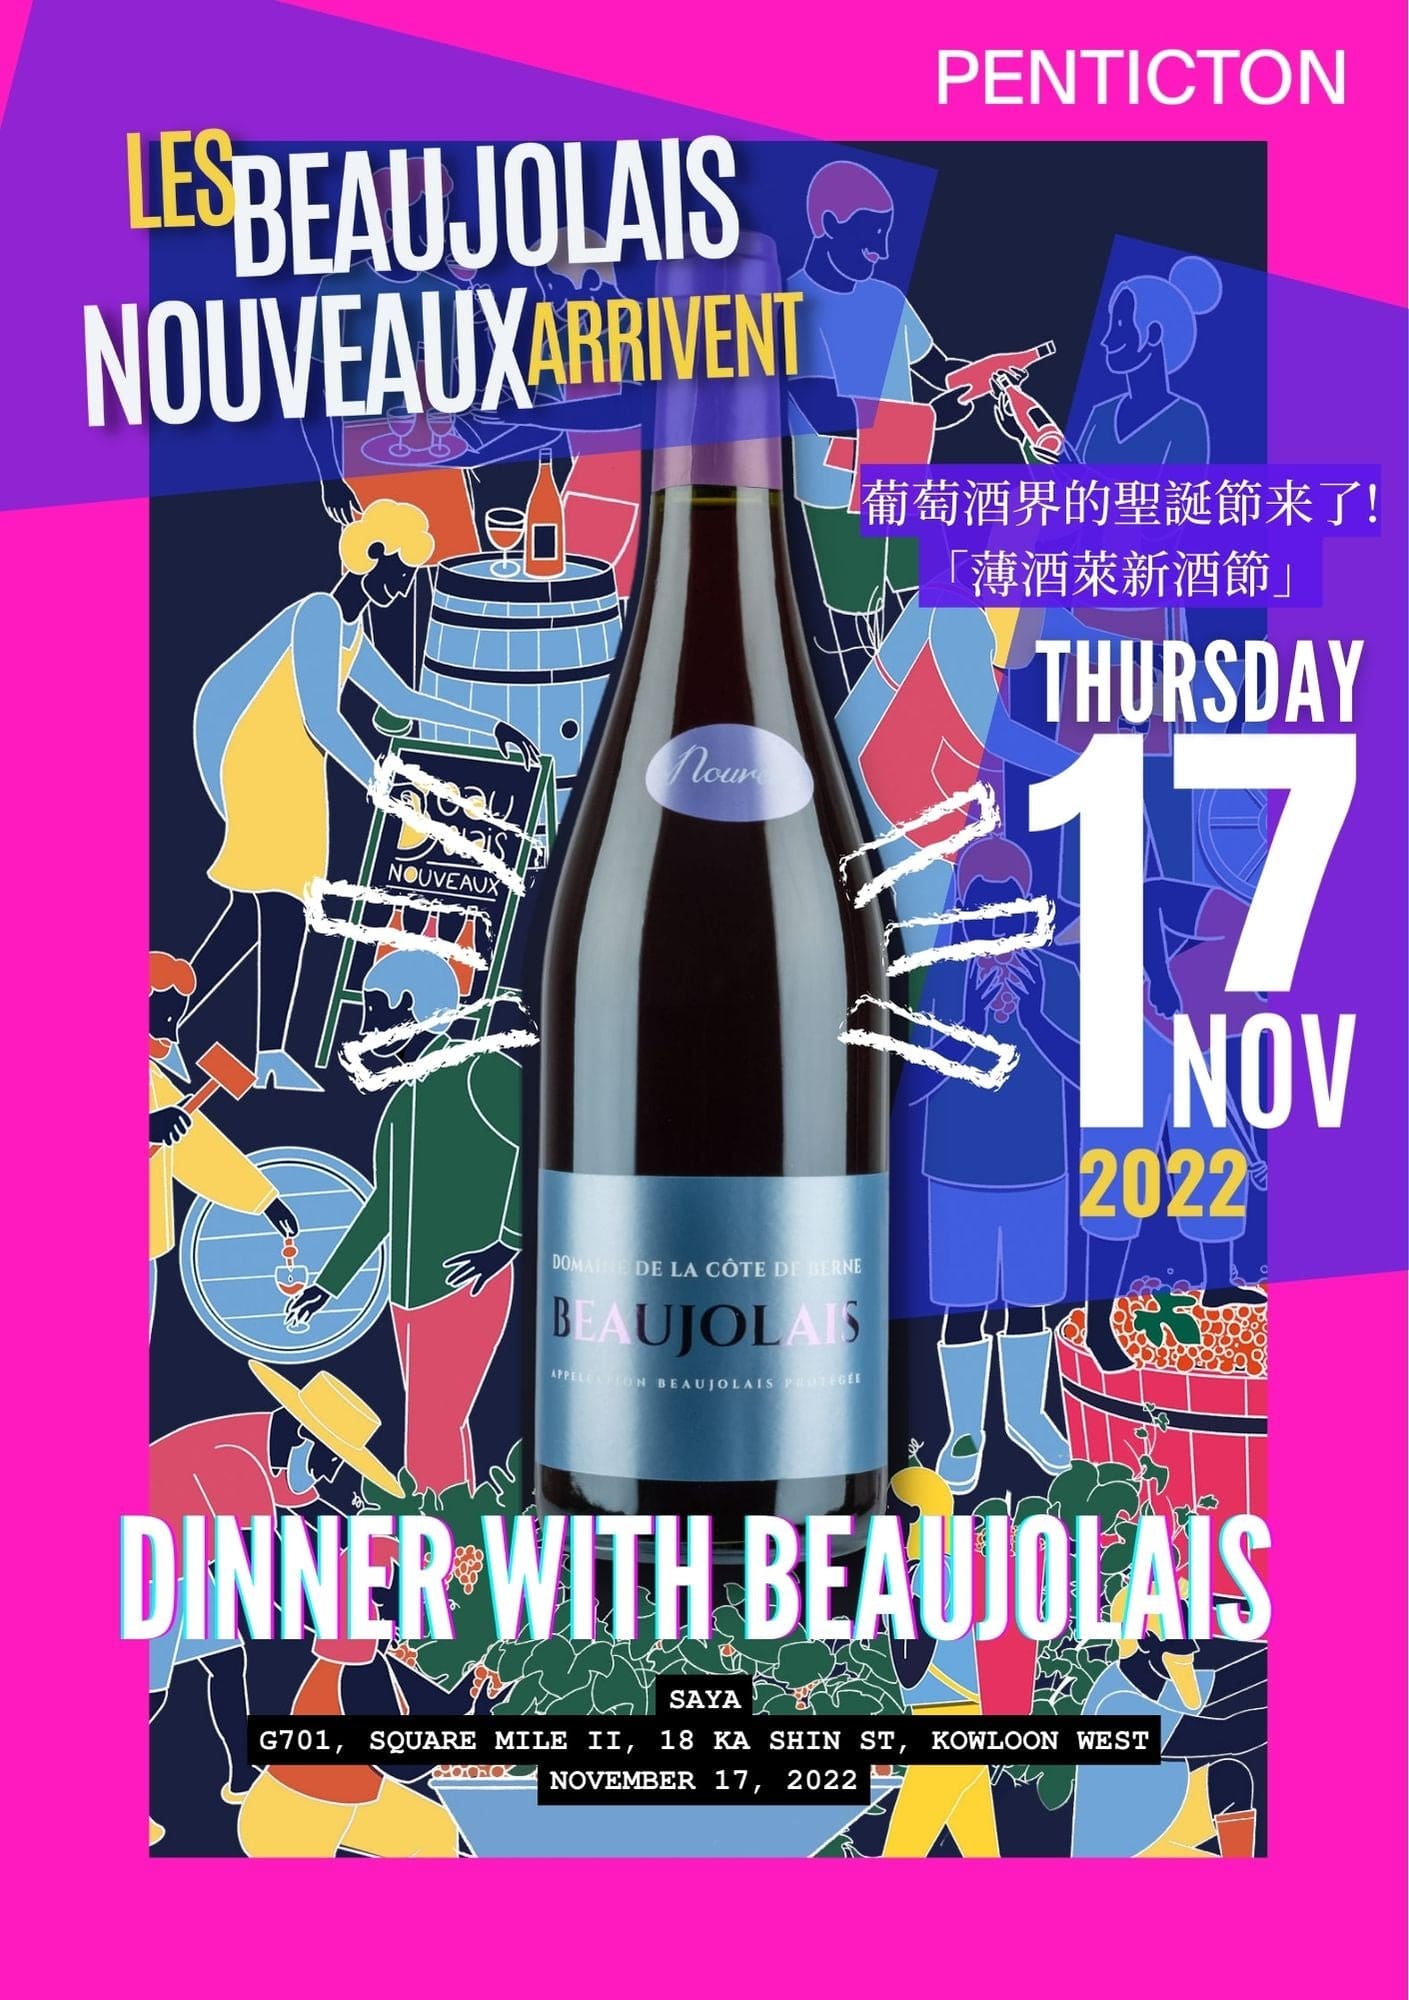 Shop PENTICTON Dinner with Beaujolais online at PENTICTON artisanal French wine store in Hong Kong. Discover other French wines, promotions, workshops and featured offers at pentictonpacific.com 